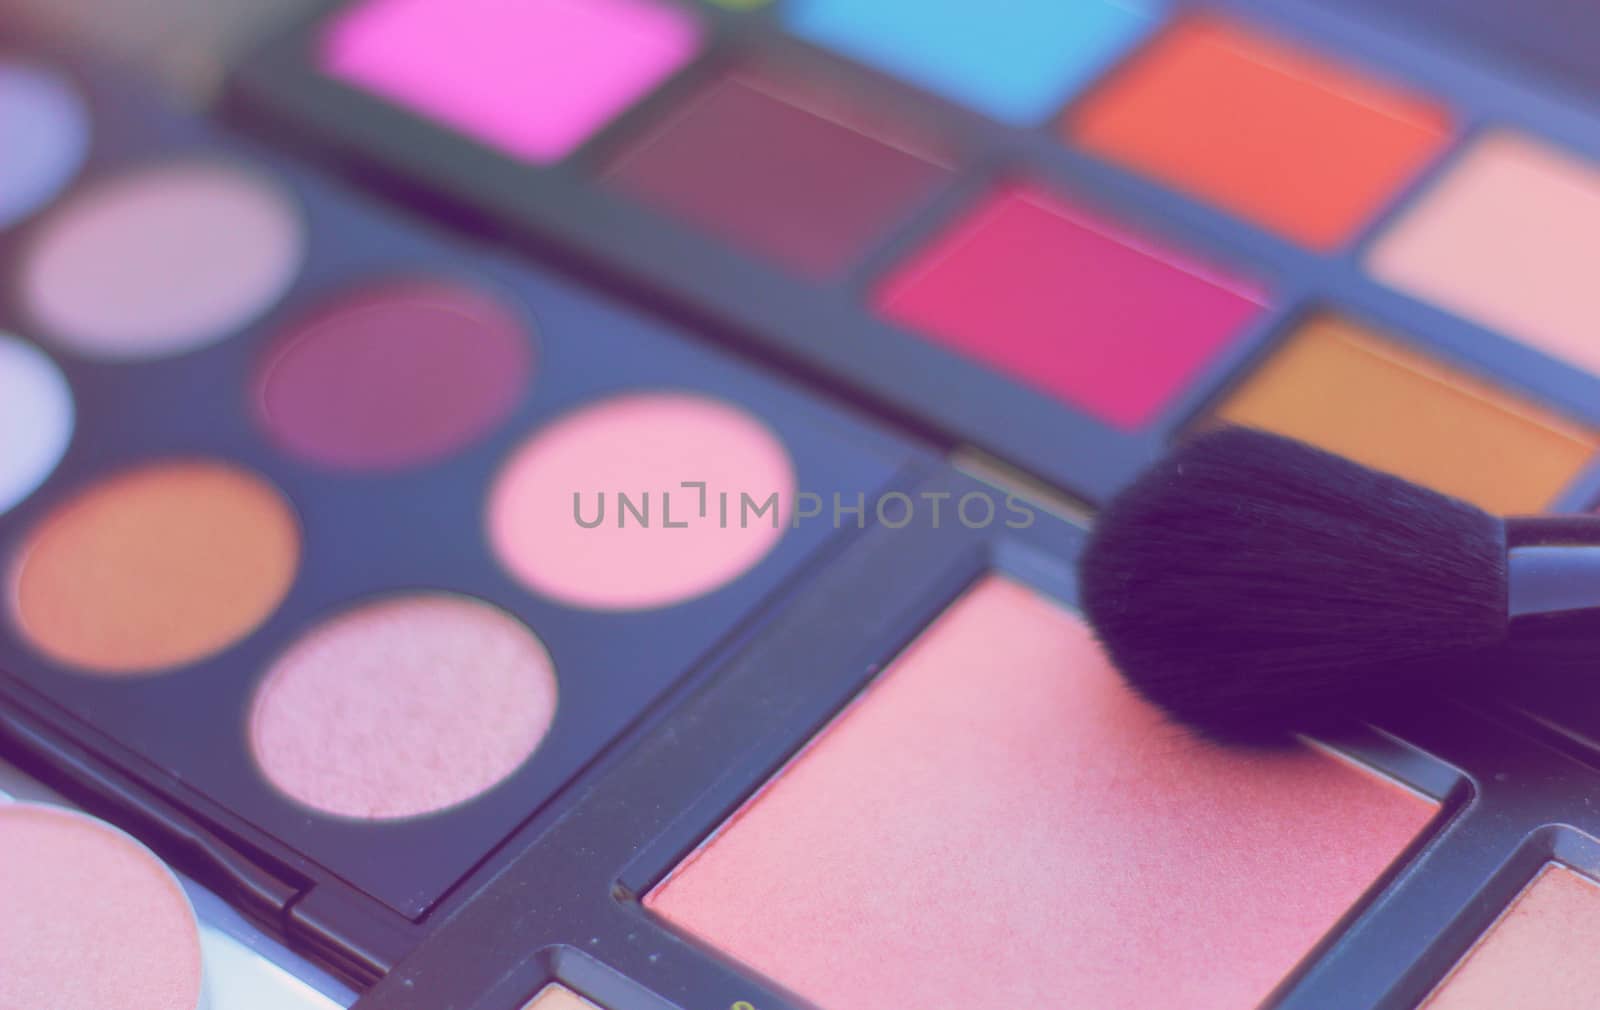 Colorful Cosmetic Pigment Palettes and various cosmetics